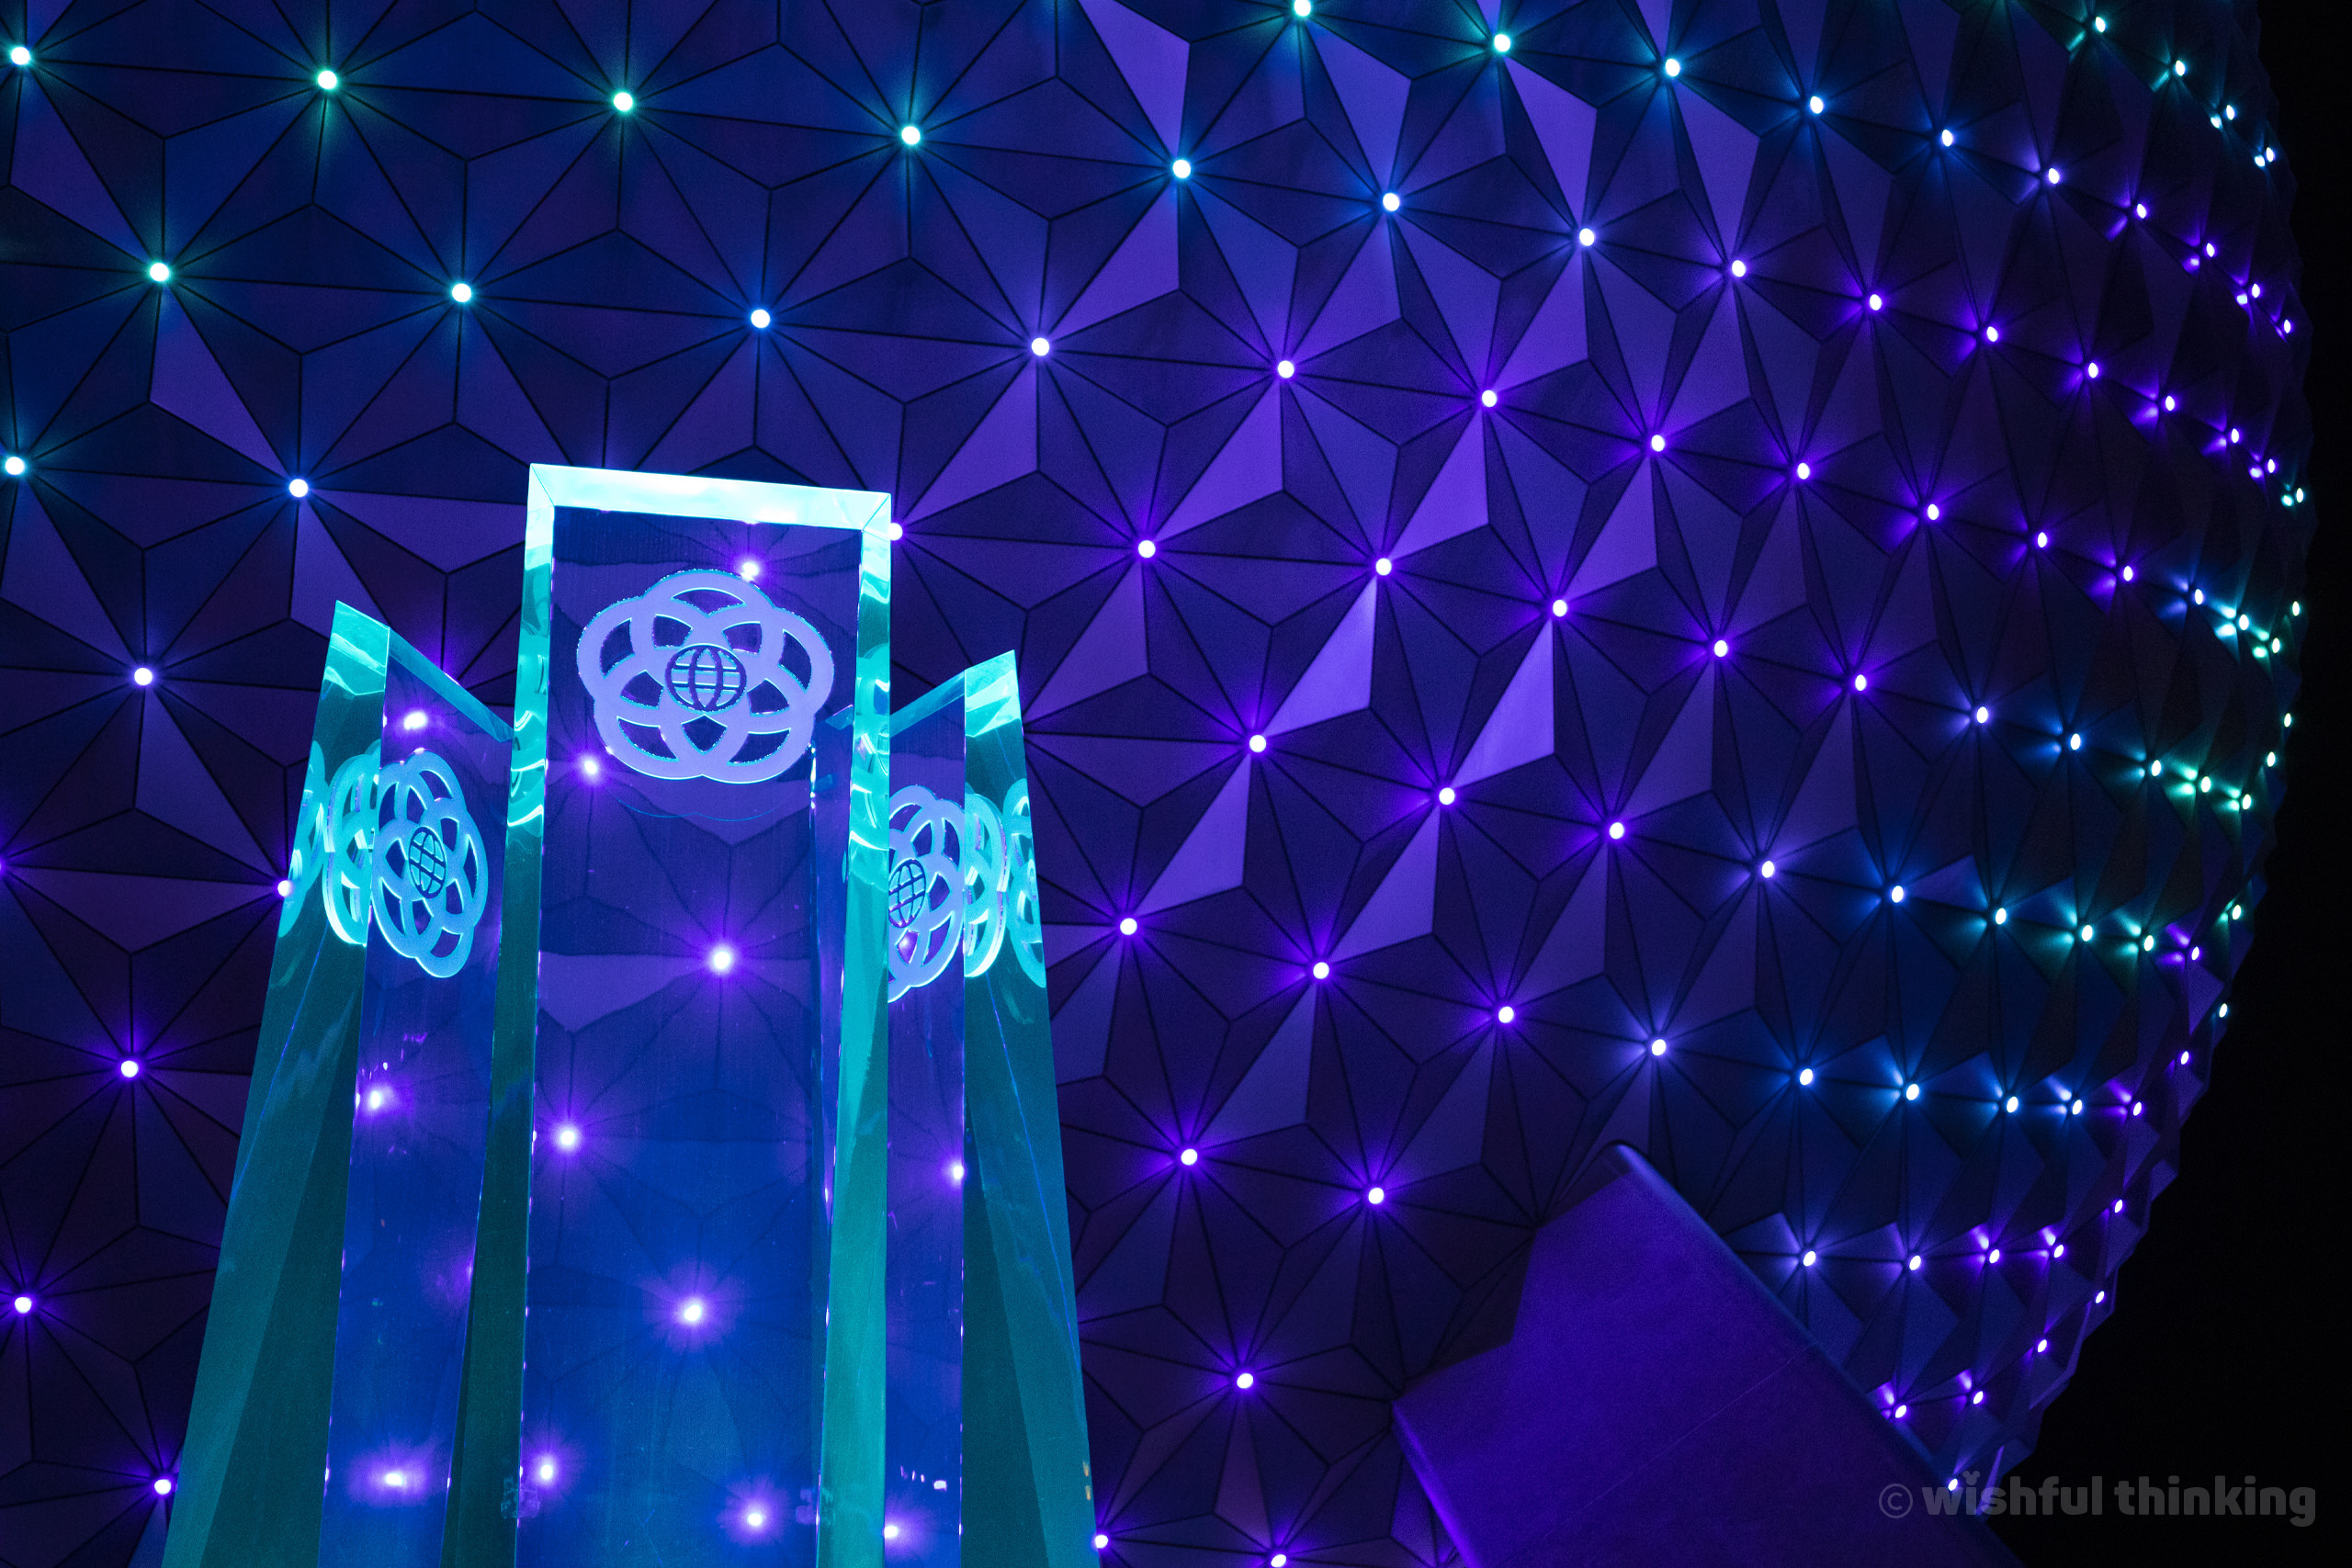 Spaceship Earth at EPCOT is illuminated in new sparkling lights for the resort's 50th Anniversary Celebration, the Most Magical Place on Earth